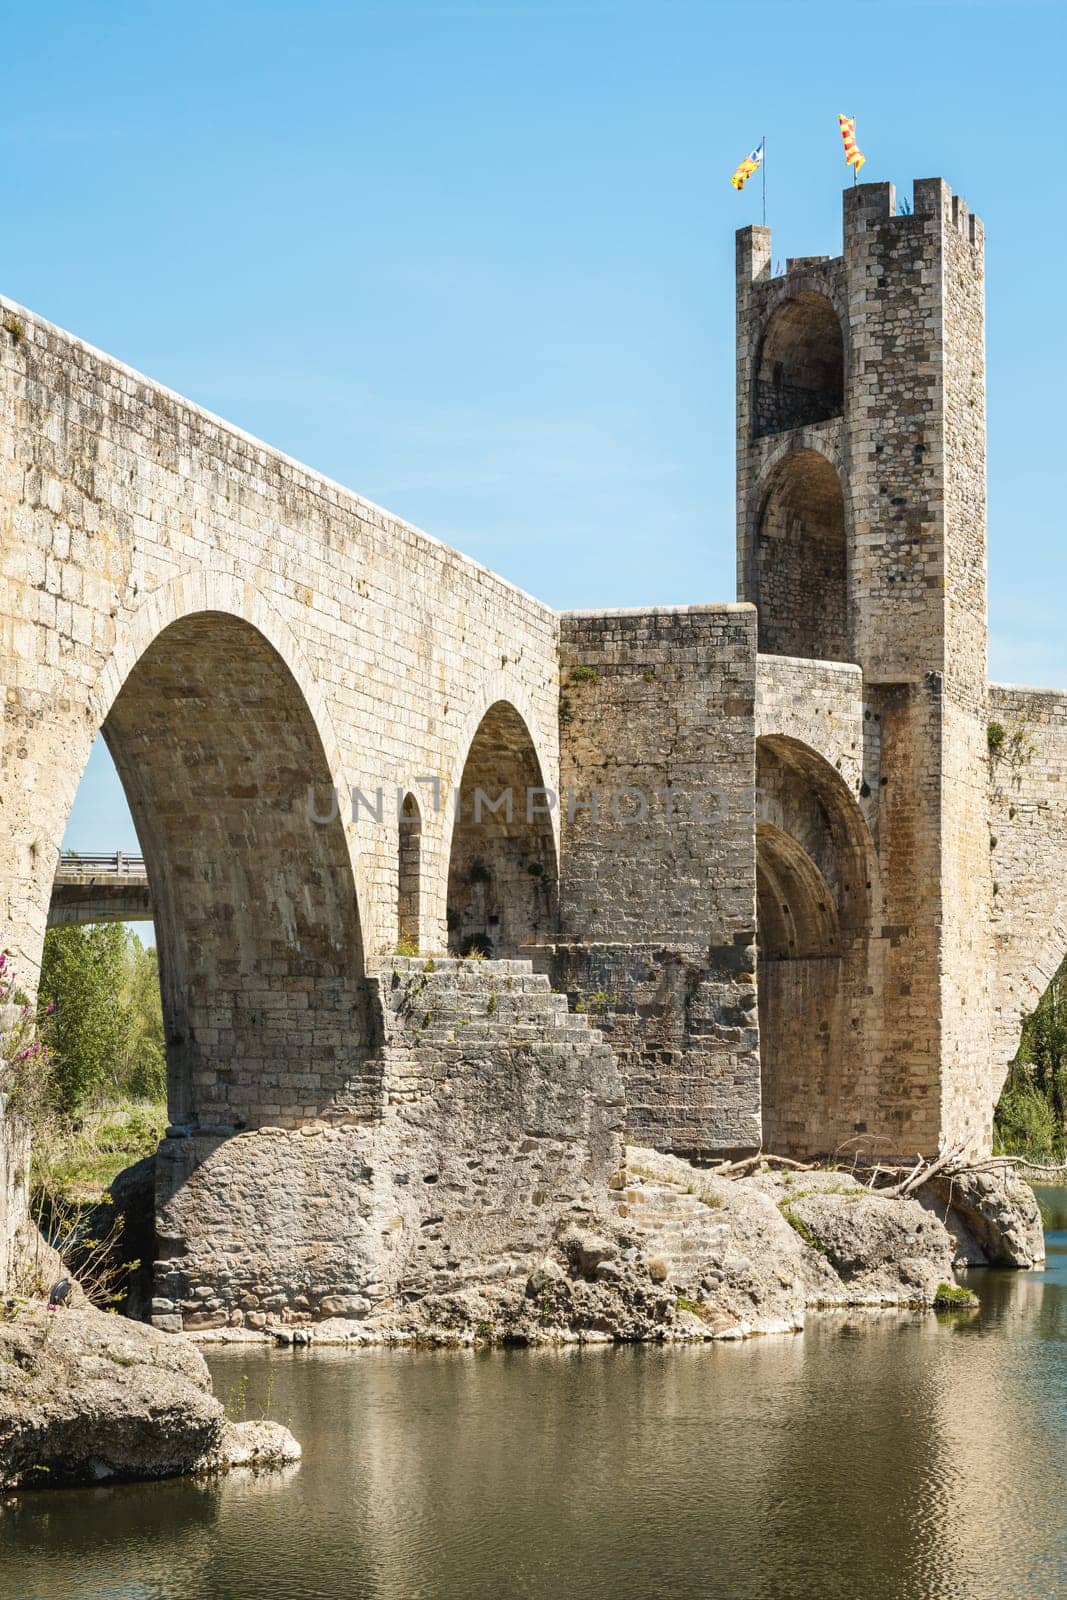 The bridge of the medieval village of Besalú with a tower in the background. The bridge is made of stone and has a stone arch. The water is calm and the sky is clear.